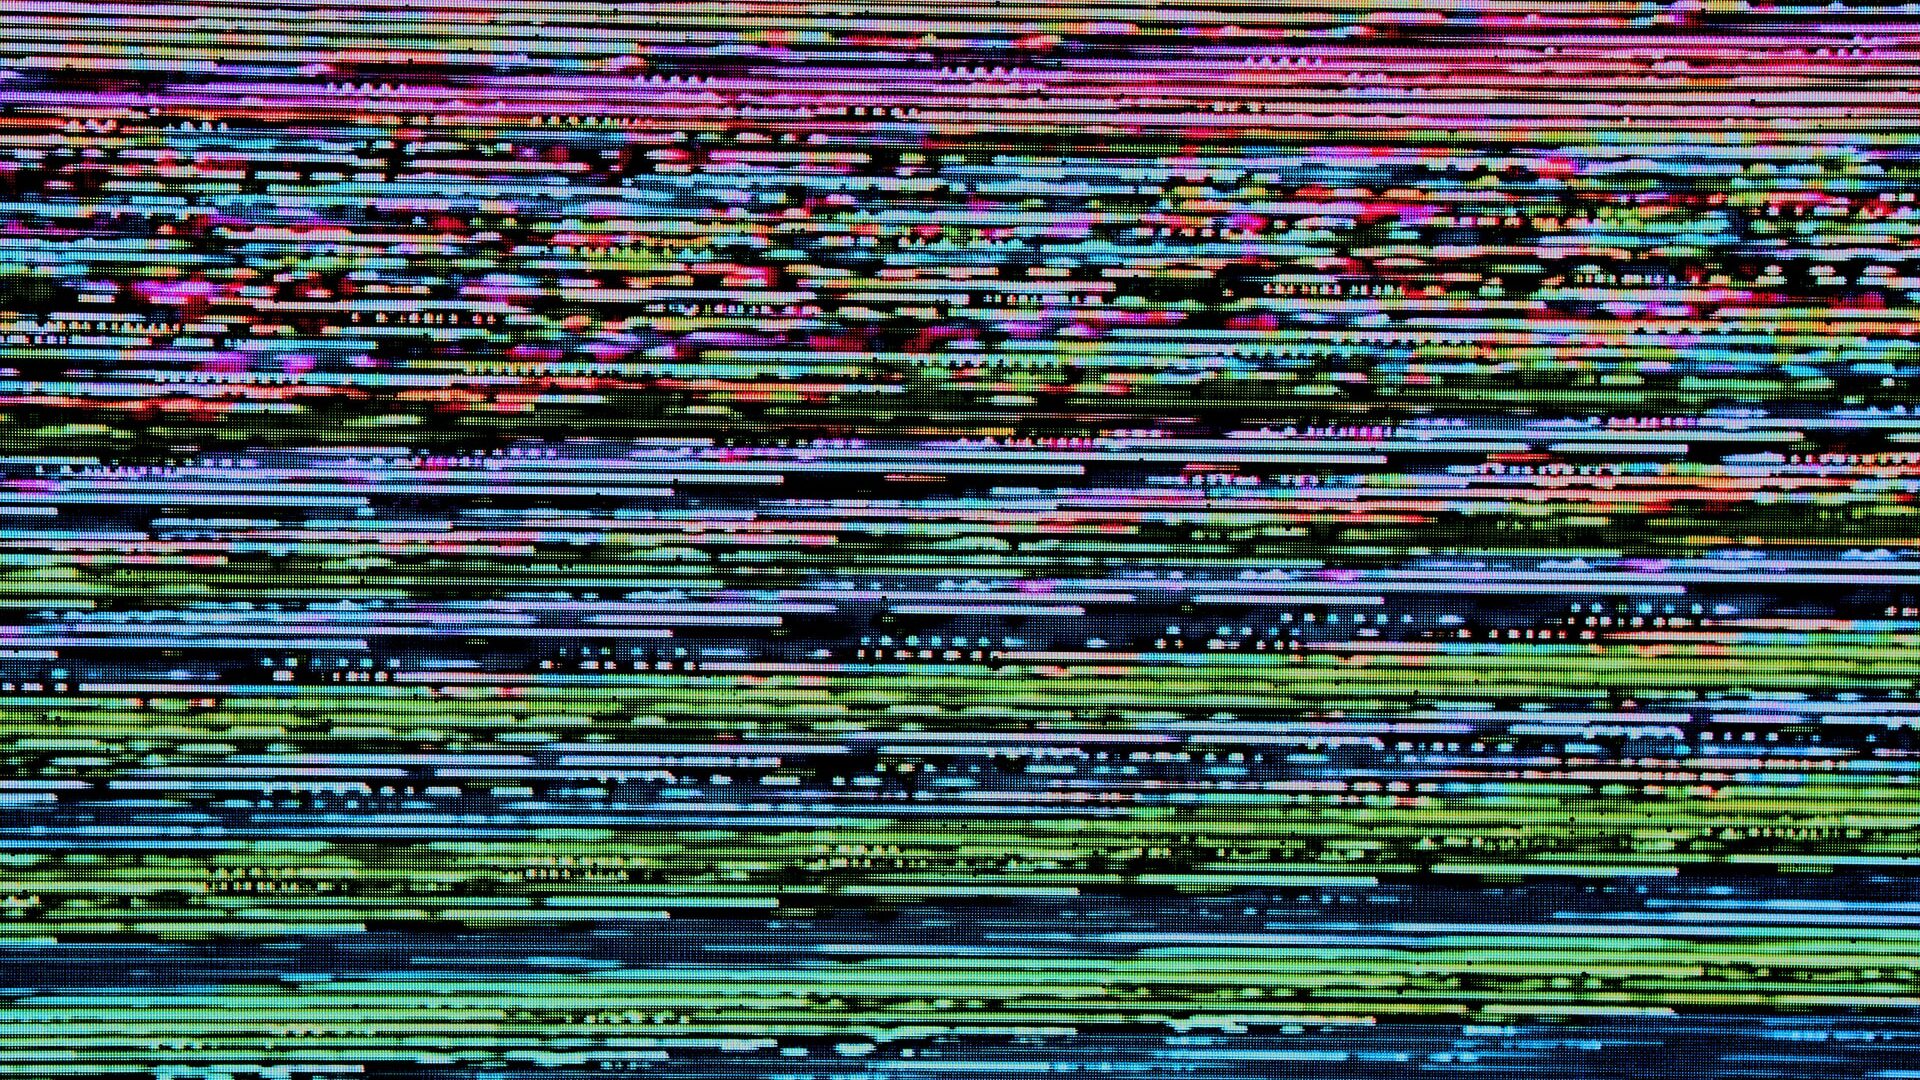 A pattern of glitches repeating on a screen reminiscent of an old CRT television.